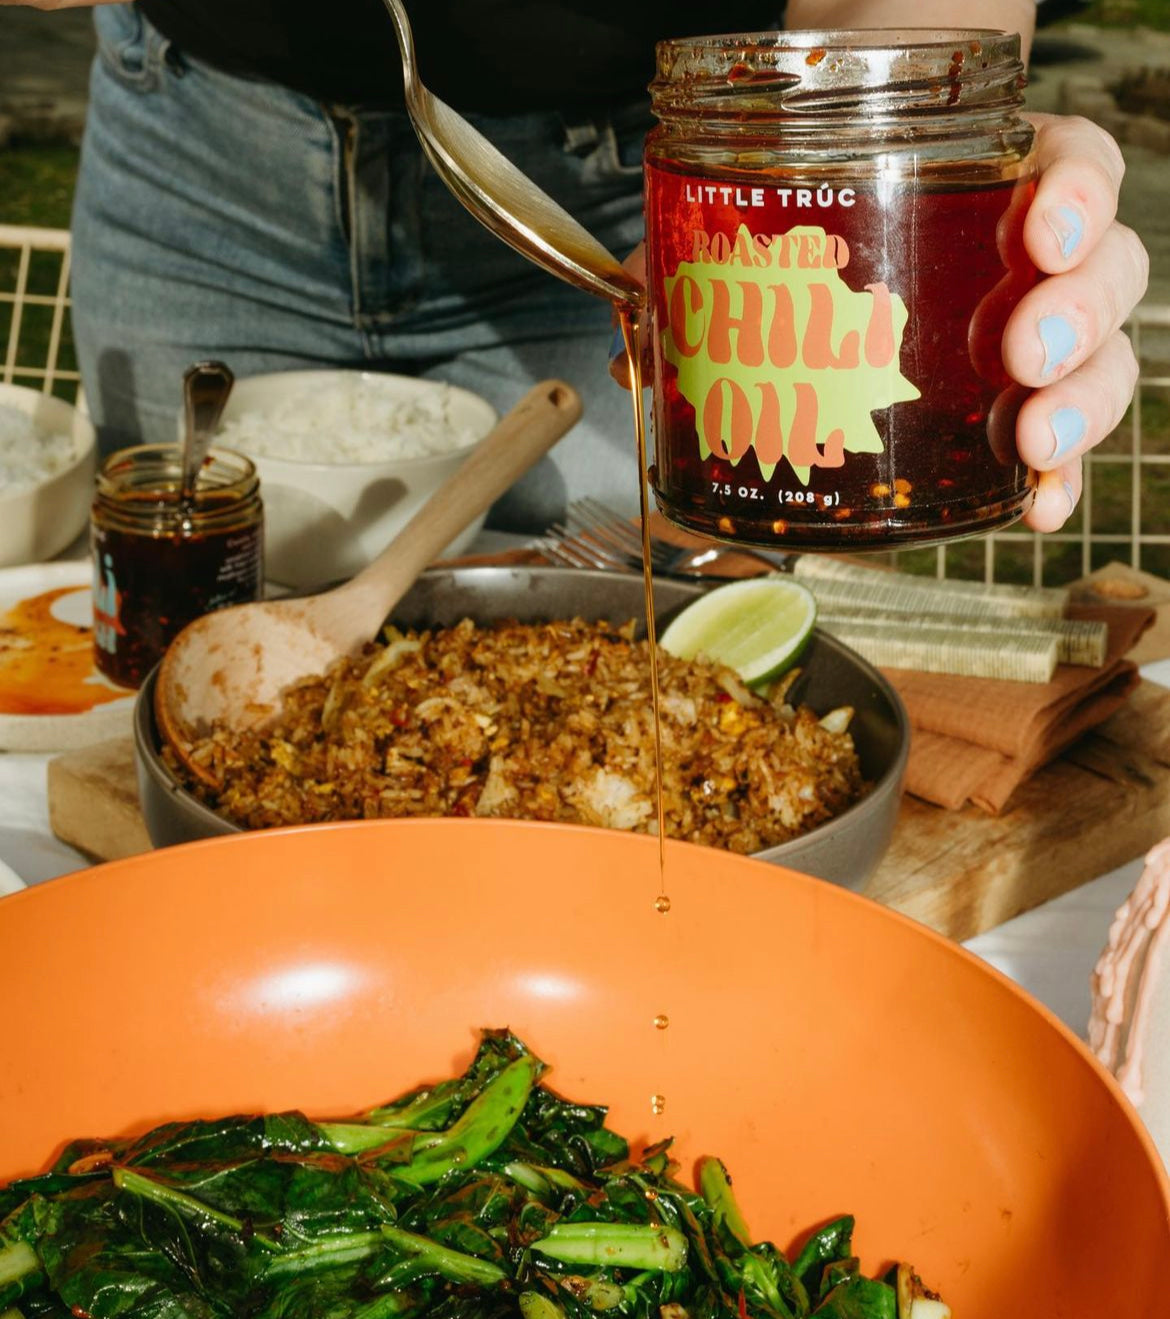 Roasted chili oil poured over stir-fried greens.